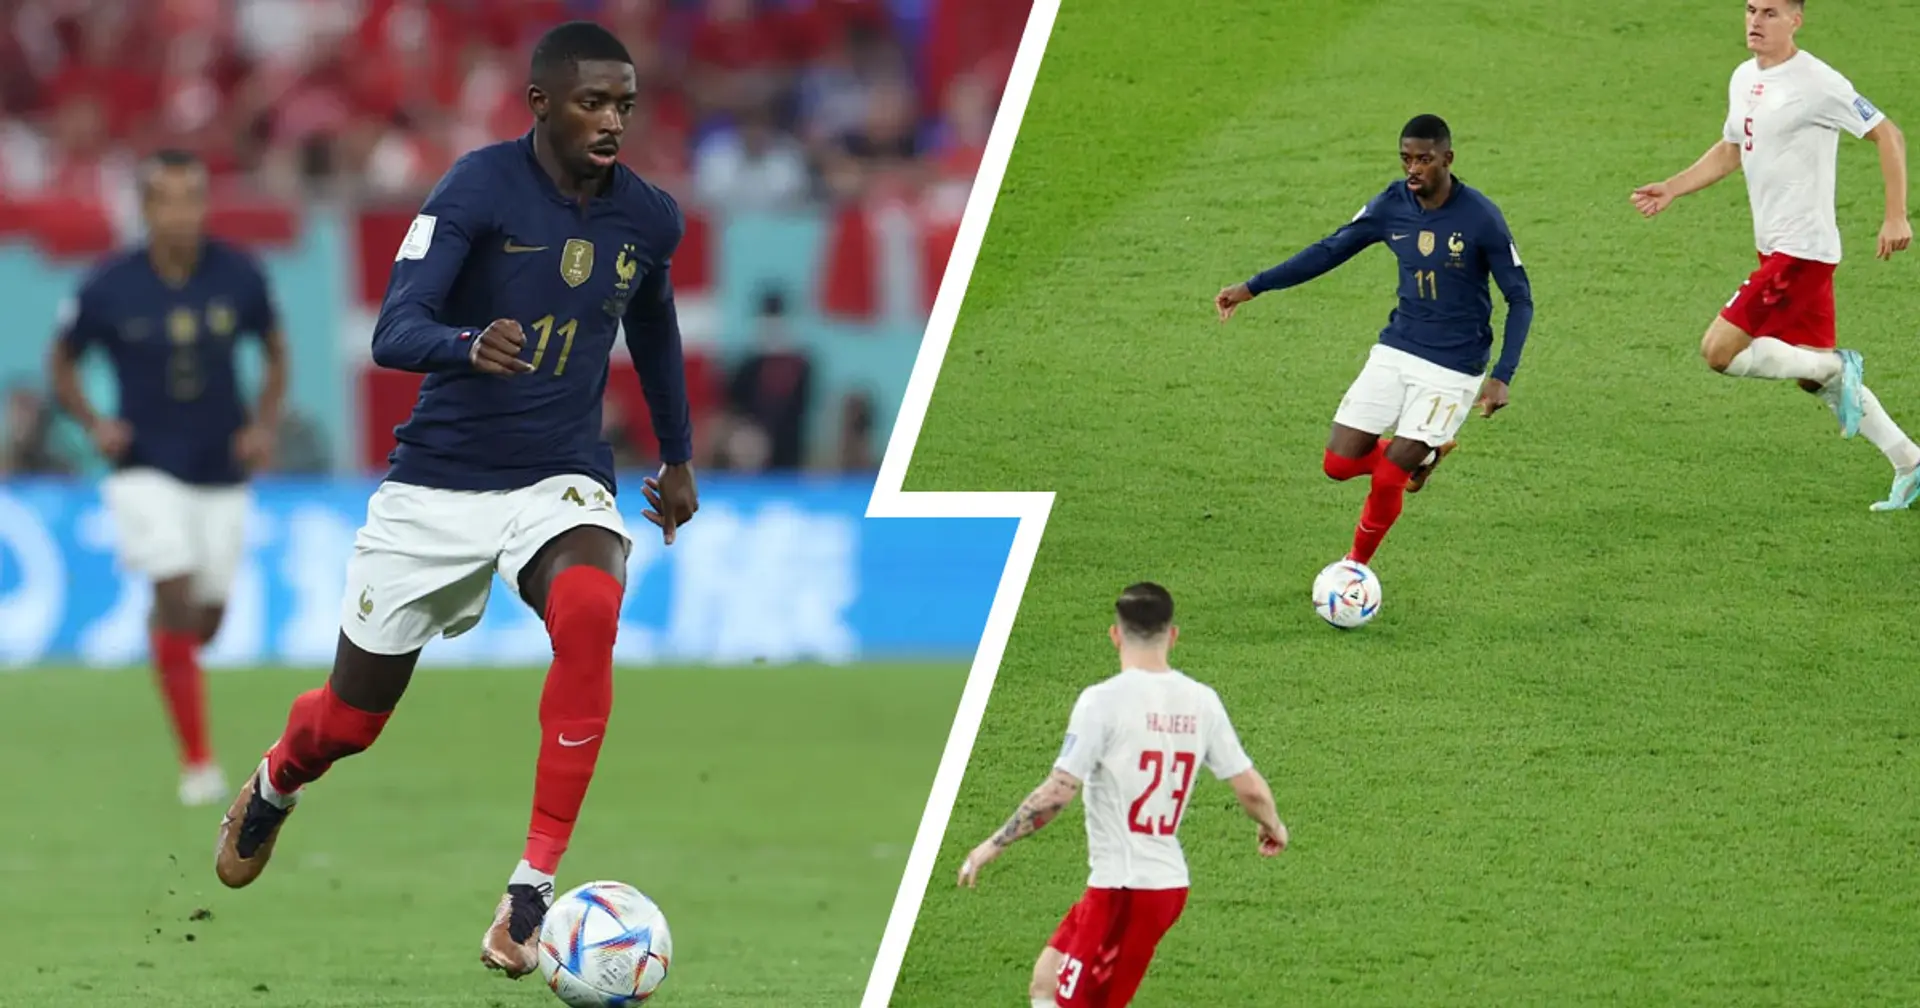 Dembele & one more Barca star among best dribblers of World Cup